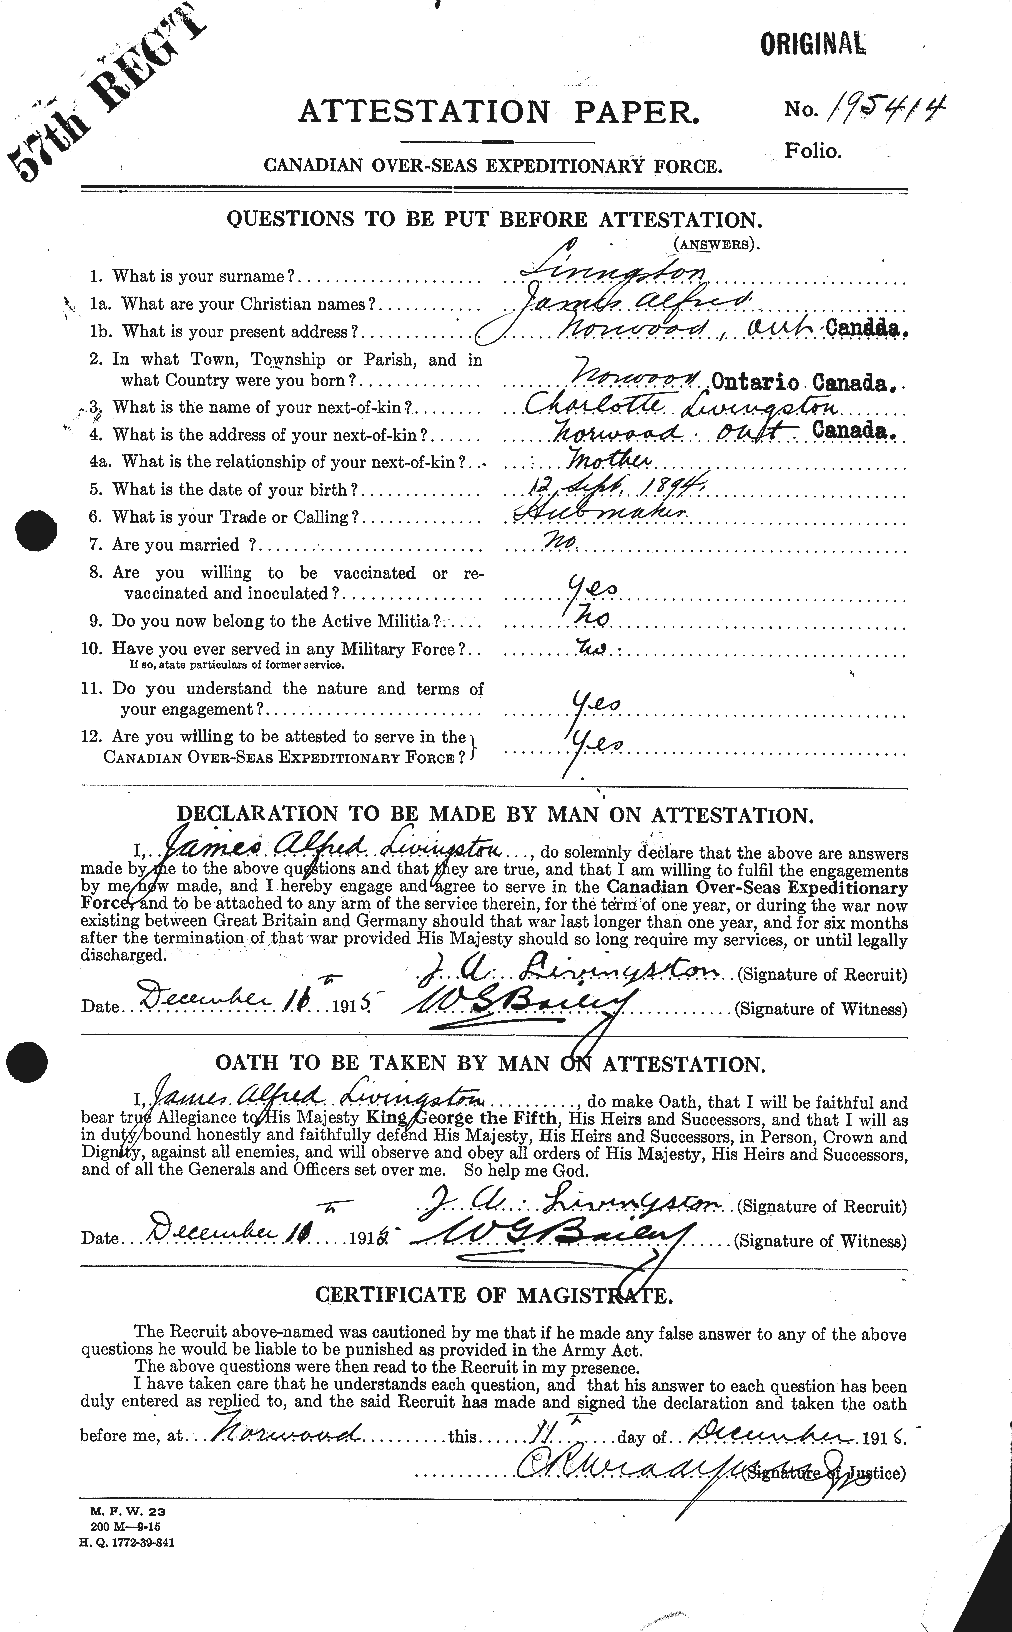 Personnel Records of the First World War - CEF 472771a